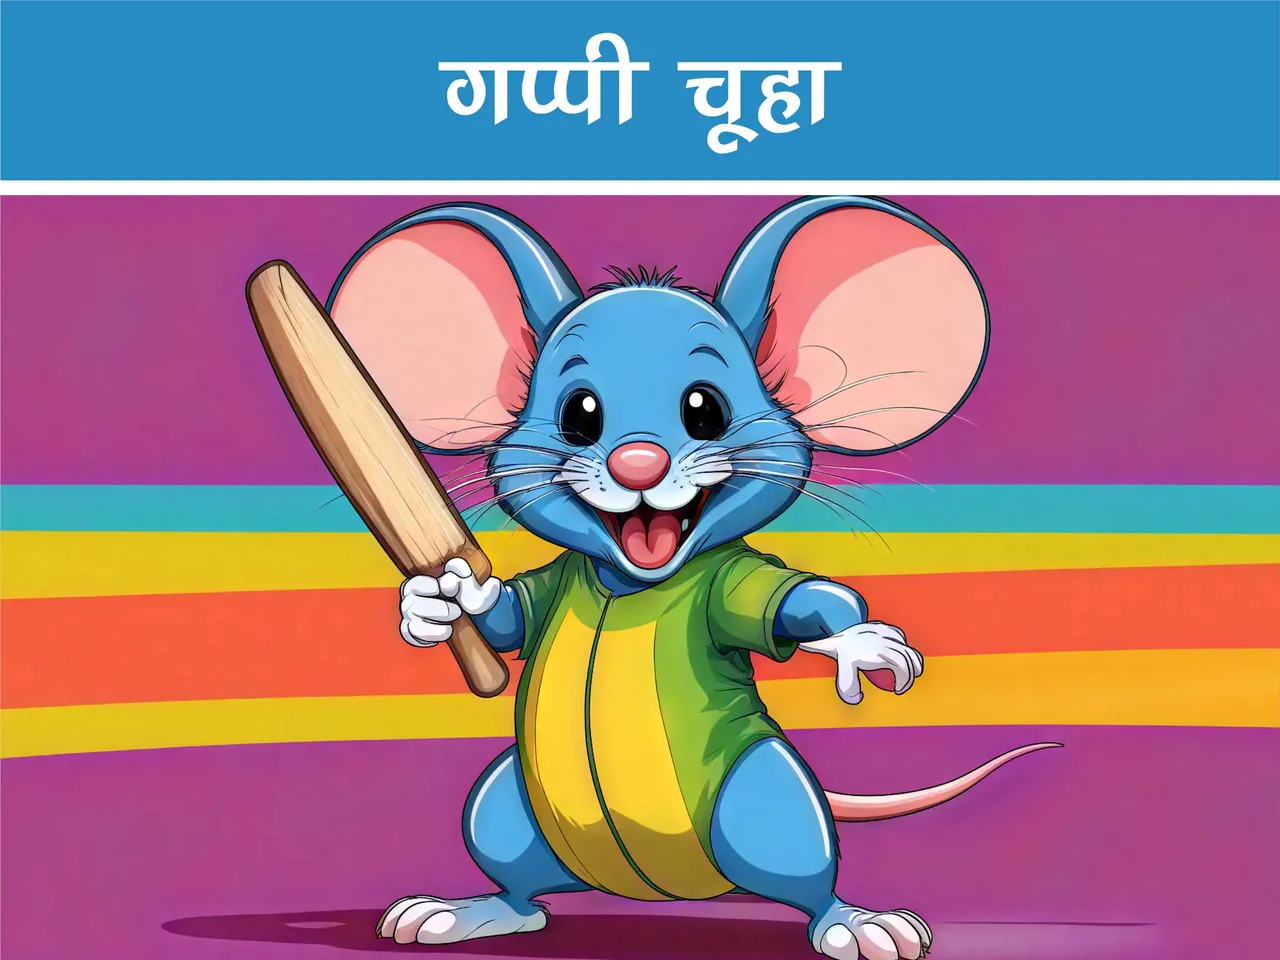 Cartoon image of mouse with cricket bat in hand